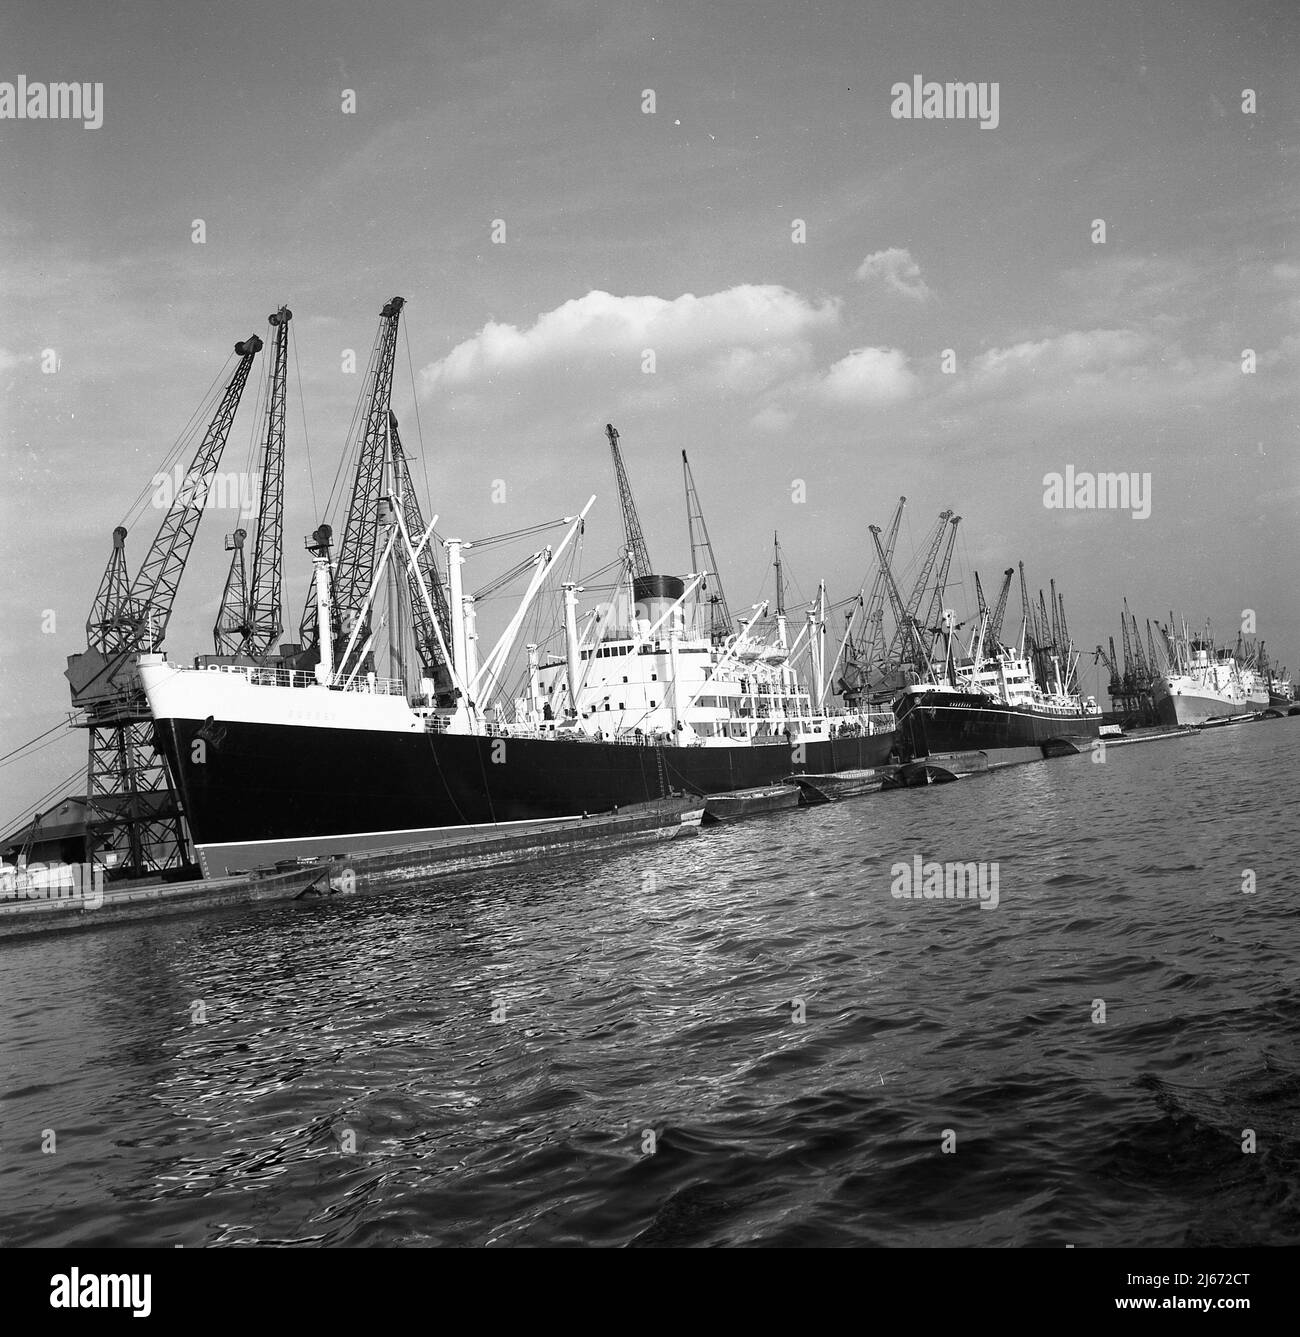 1960s, historcial, Port of London, large steam drived cargo ships moored up beside the dockside cranes, East London docks, England, UK. Stock Photo